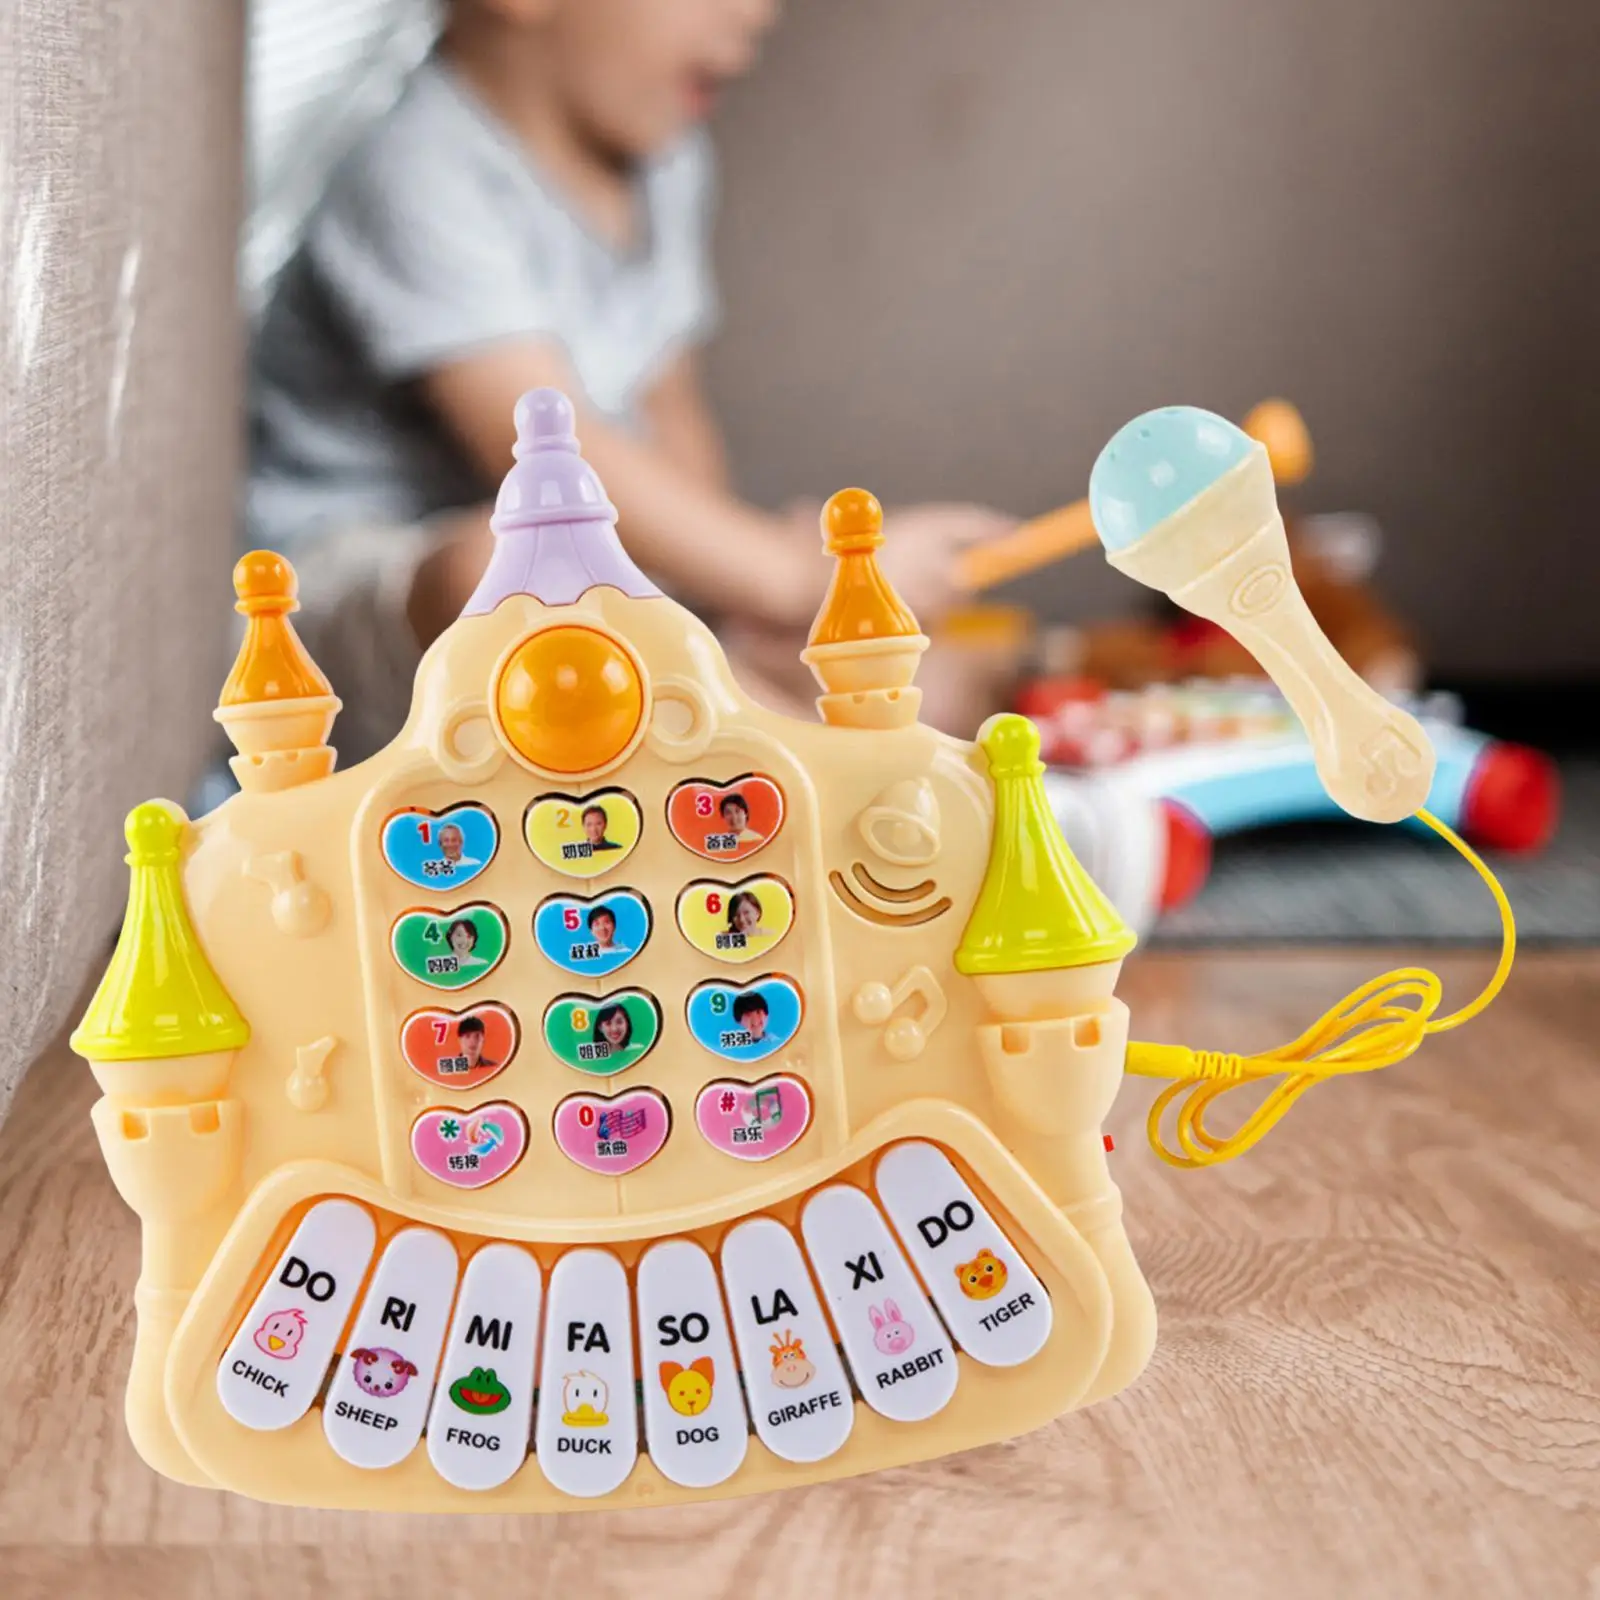 Musical Piano Toy Musical Toy 8 Key Early Educational Toy Musical Instruments Toys for Boys Girls Infants Kids Birthday Gifts